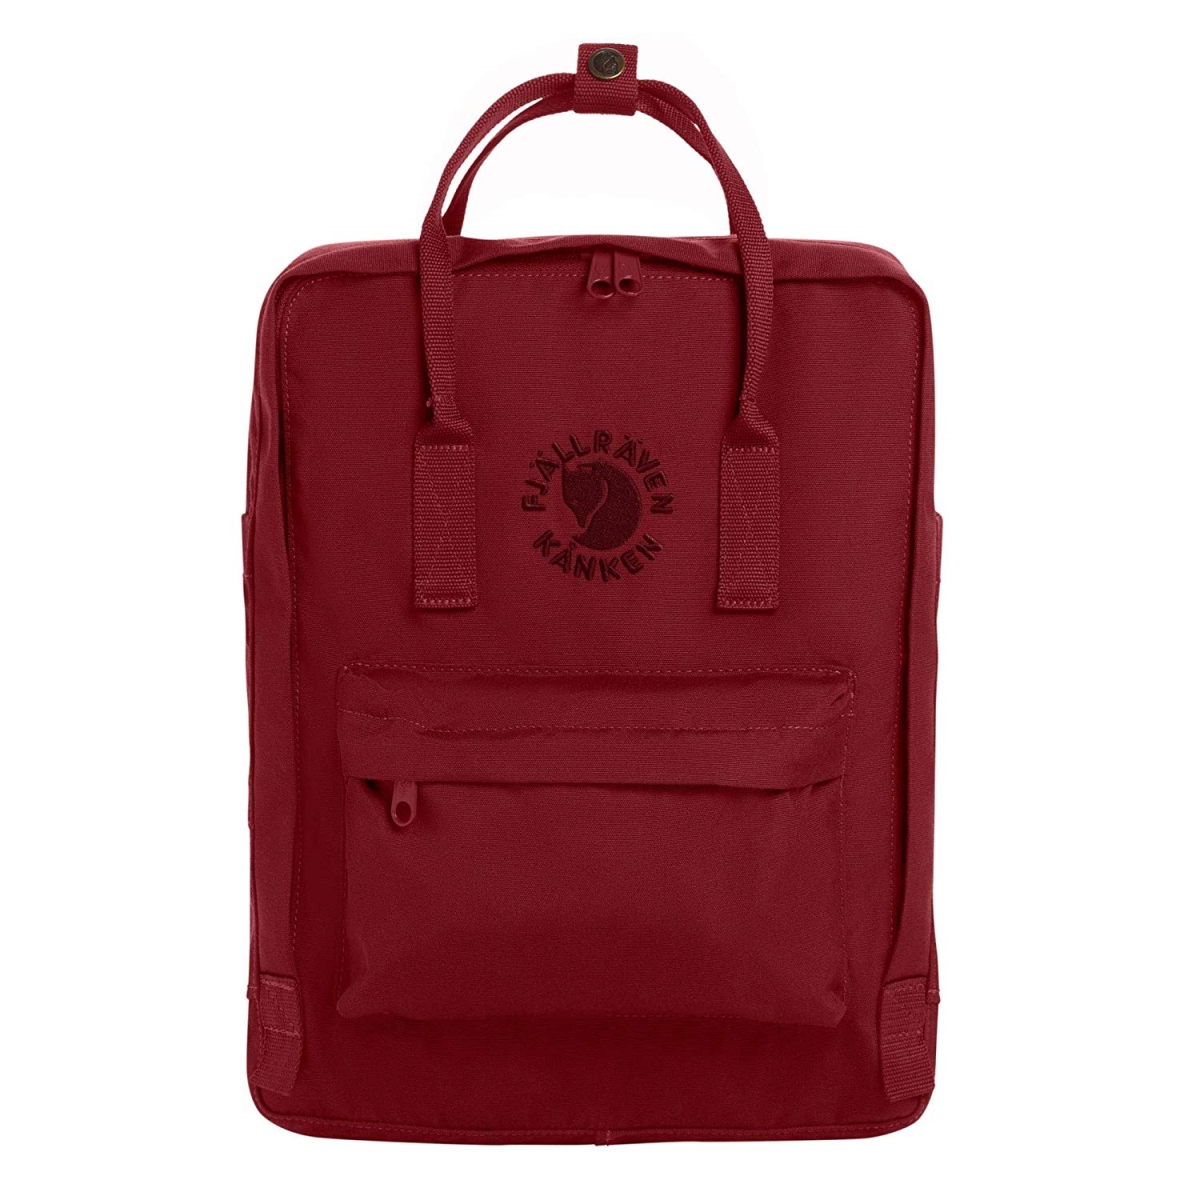 23548-326 Re-kanken Special Edition Recycled Backpack For Everyday - Ox Red